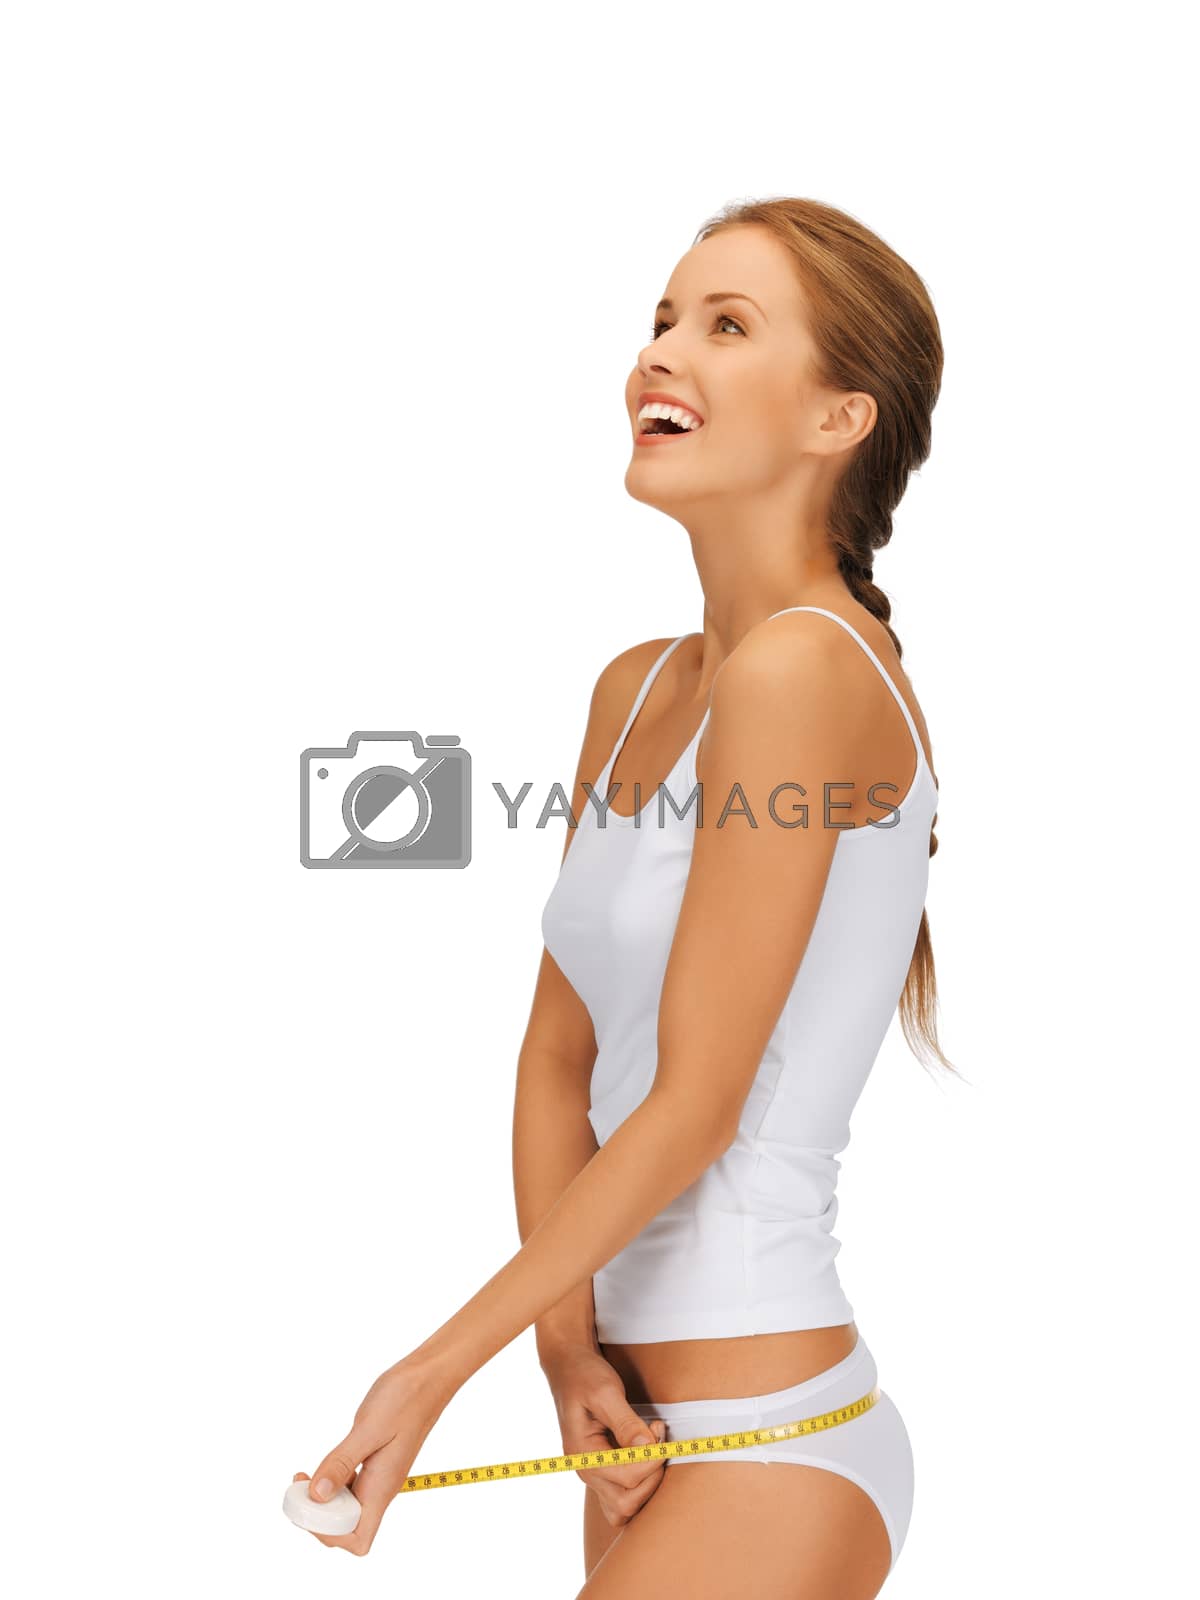 Royalty free image of woman measuring her hips by dolgachov